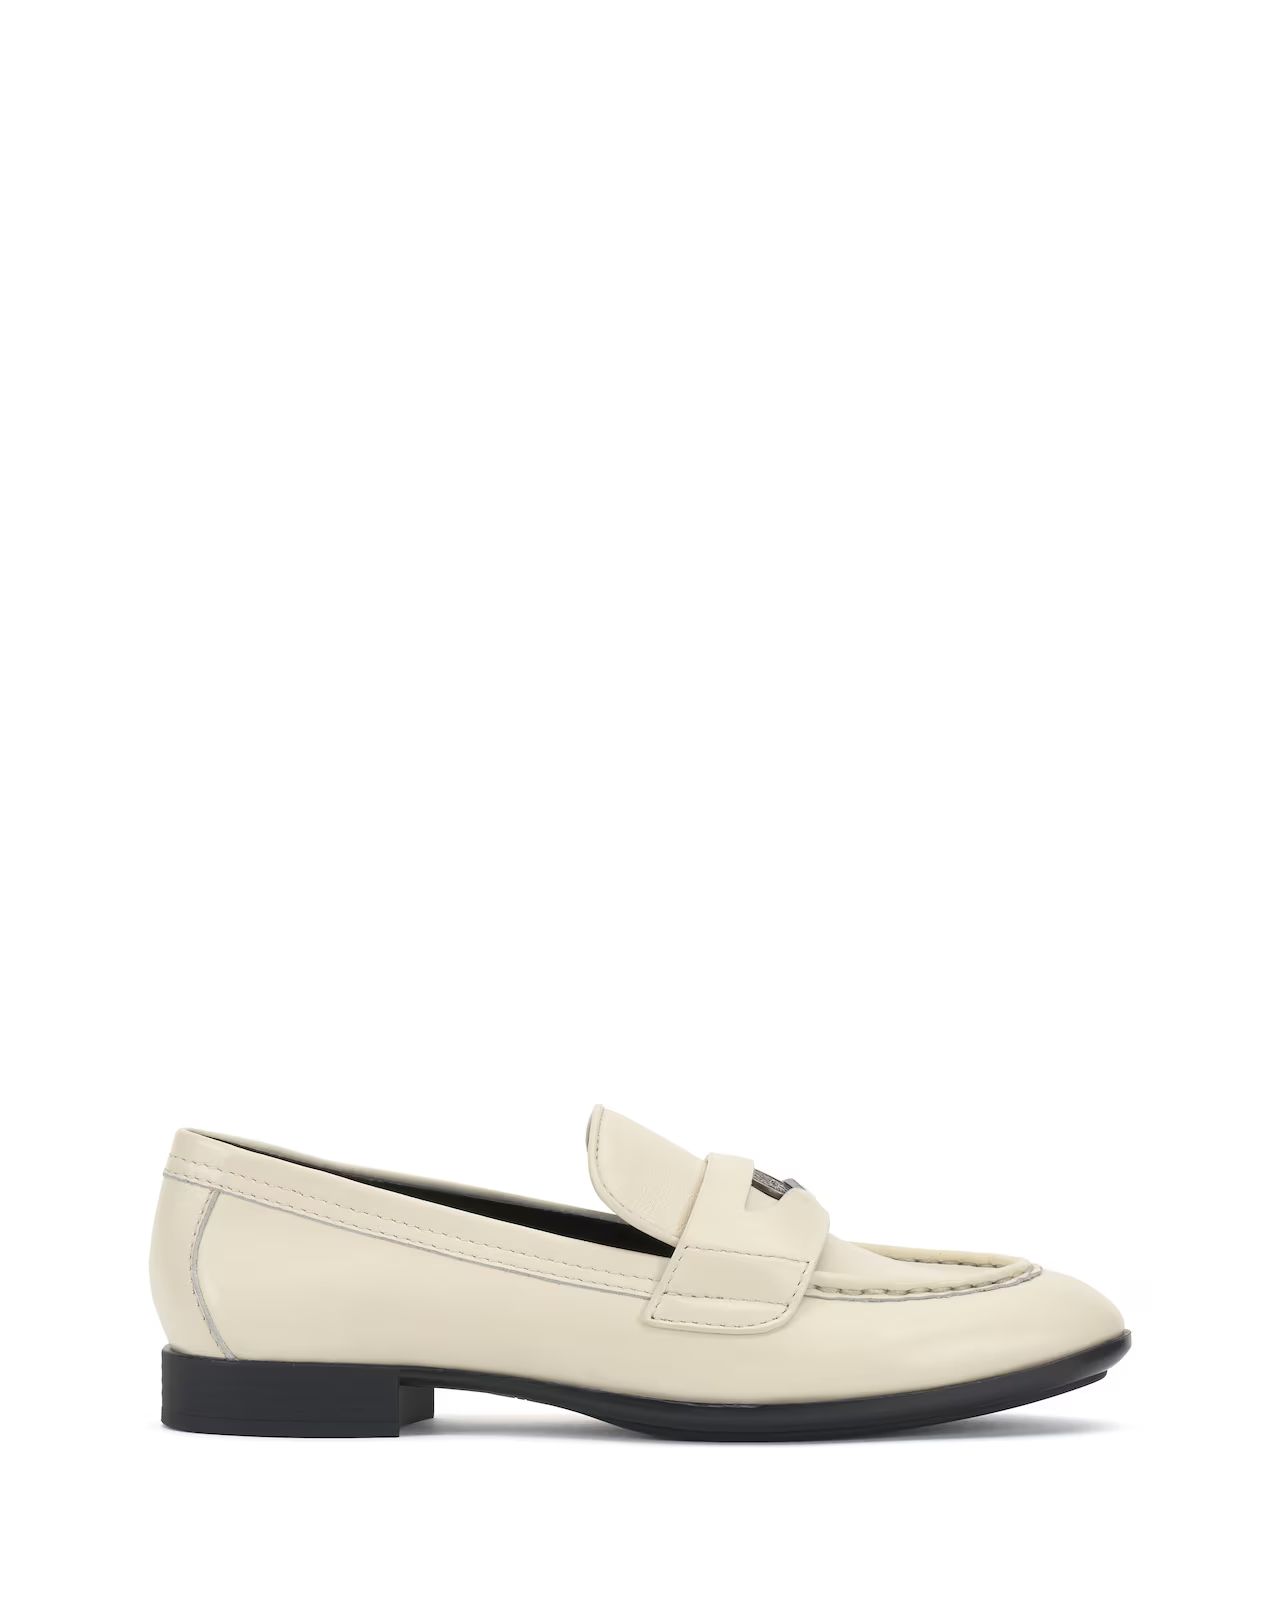 Vince Camuto Parama Penny Loafer | Vince Camuto